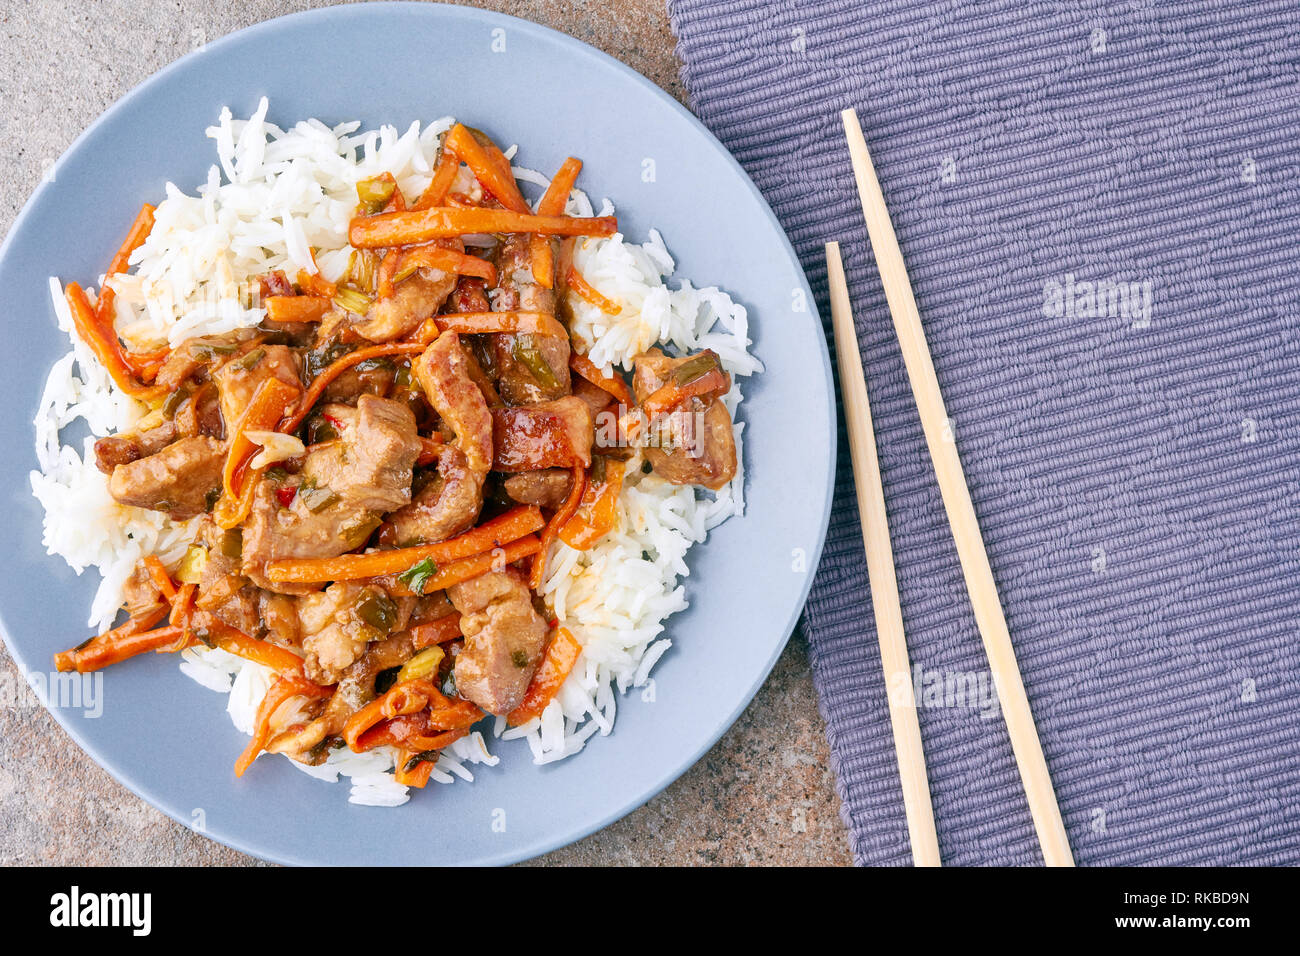 Dish of classic Chinese sweet and sour pork Stock Photo